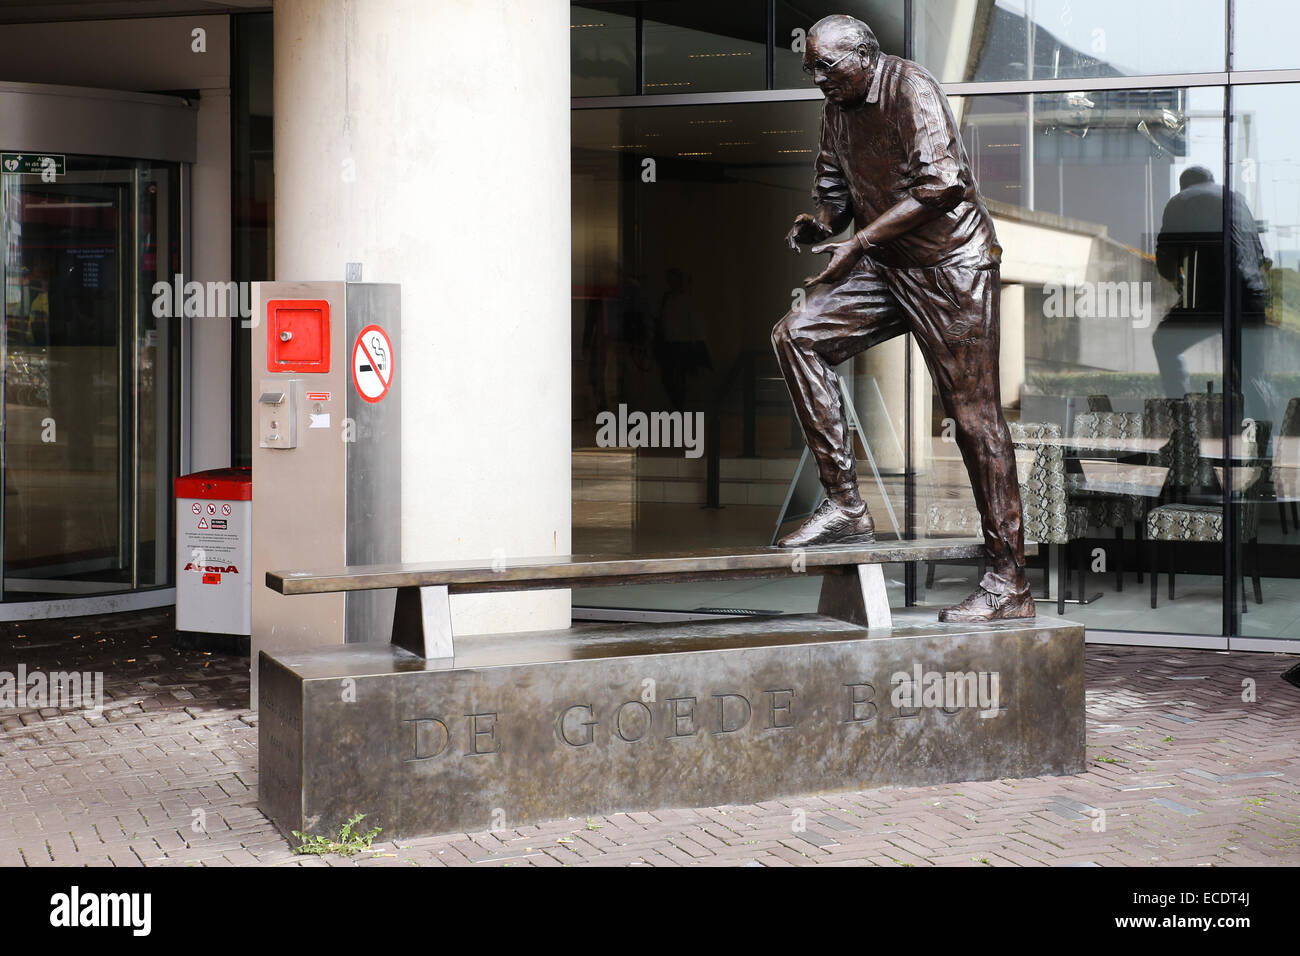 Bobby Haarms statue Amsterdam arena sculpture Stock Photo